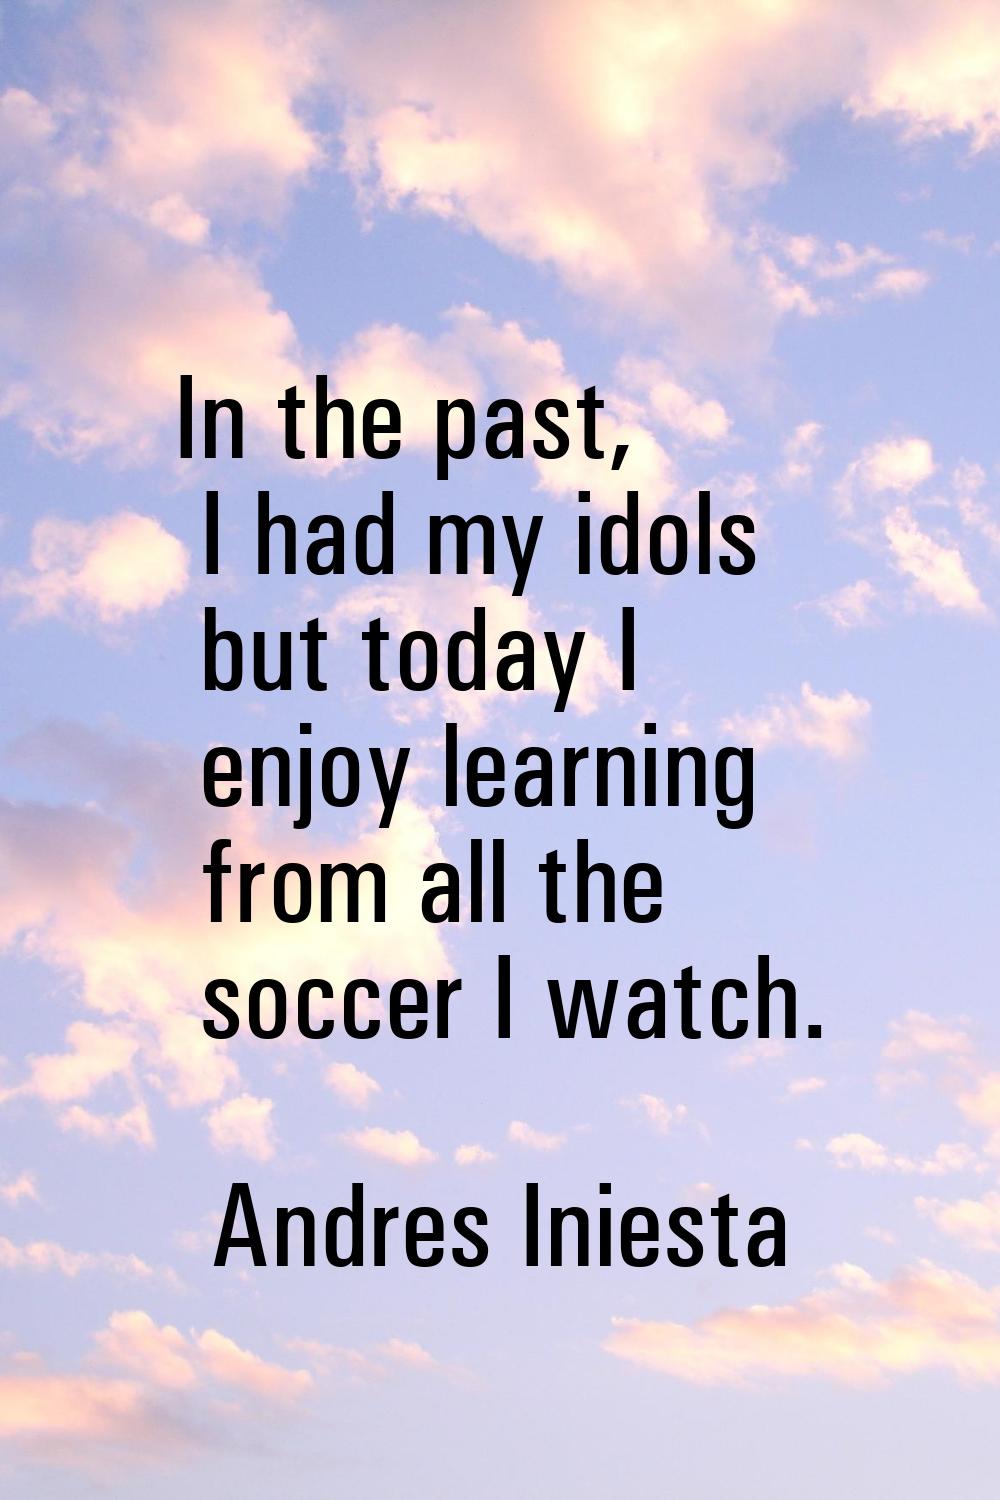 In the past, I had my idols but today I enjoy learning from all the soccer I watch.